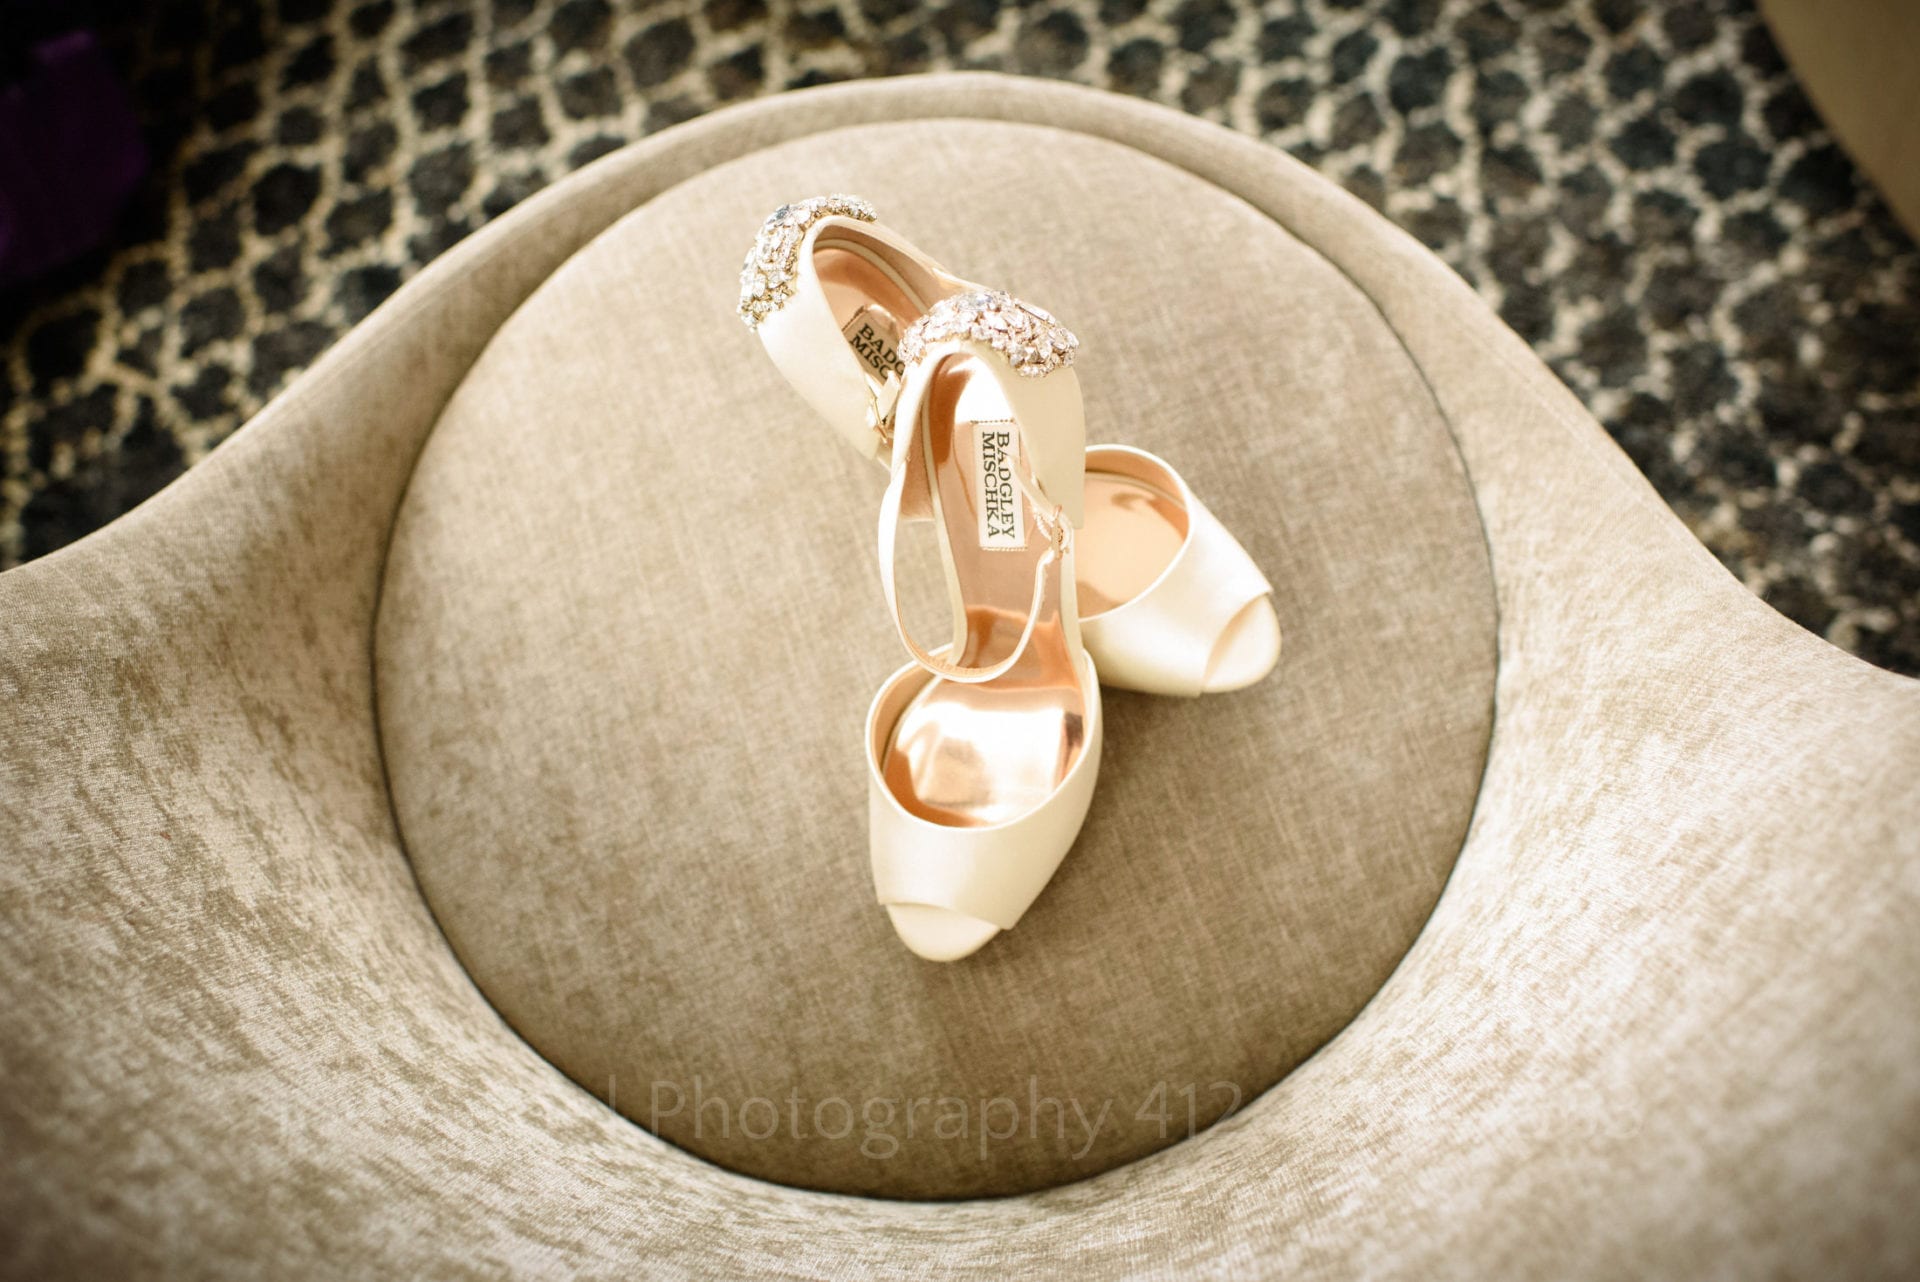 Badgley and Mischka open toed shoes seen from above while on a circular chair cushion.